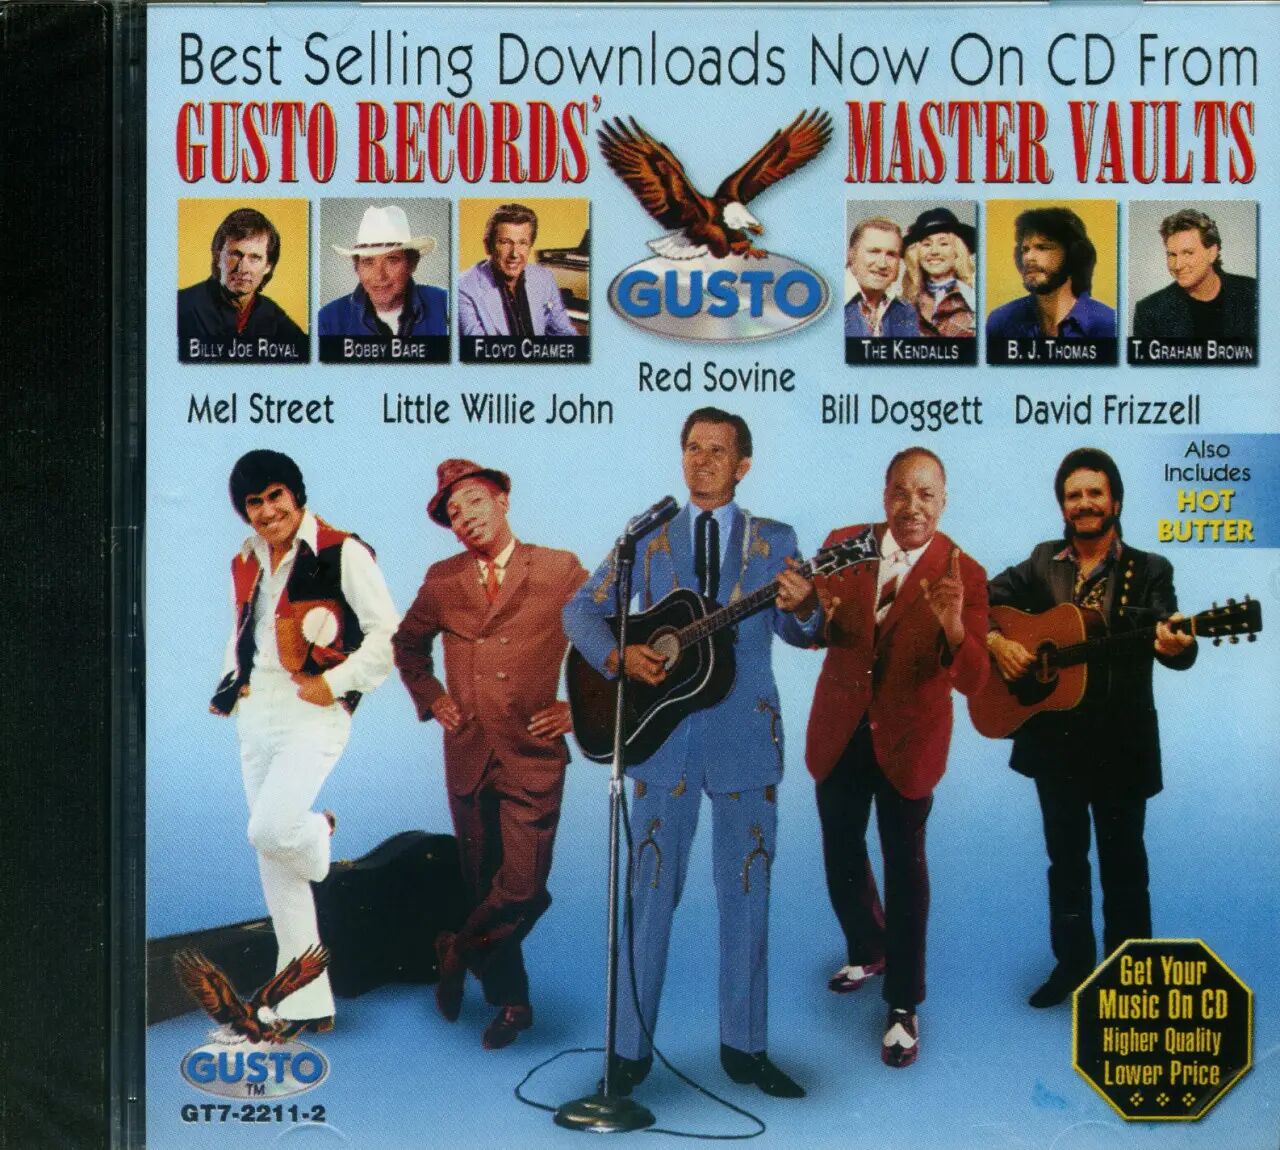 Various - Best Selling Downloads Now On CD From Gusto Records Master Vaults (CD)